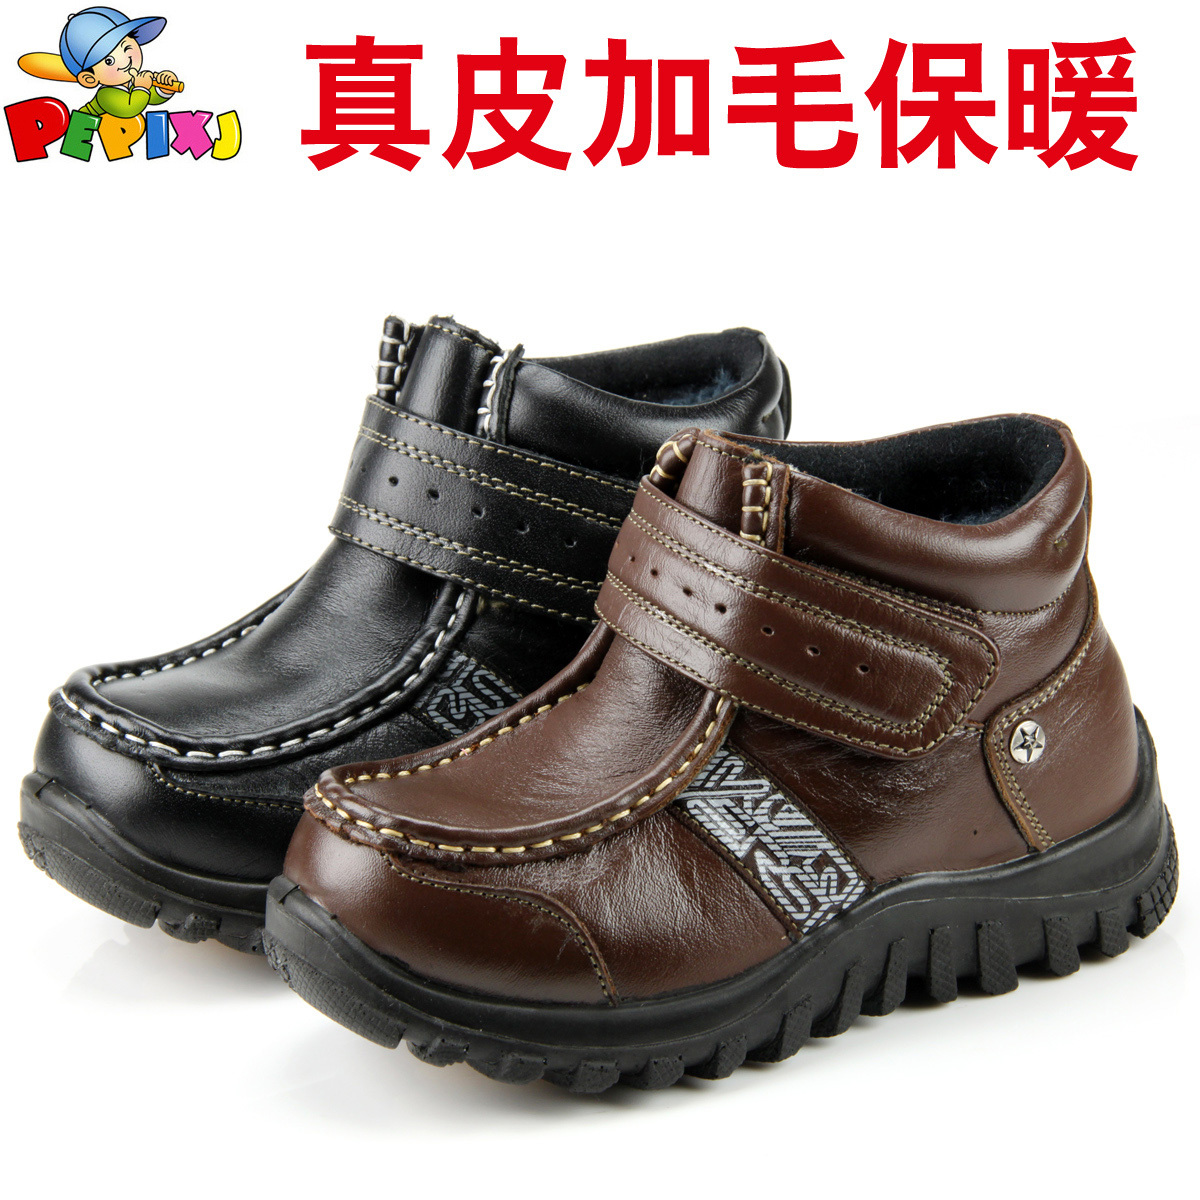 free shipping: Clearance selling.Genuine leather children's shoes baby ...